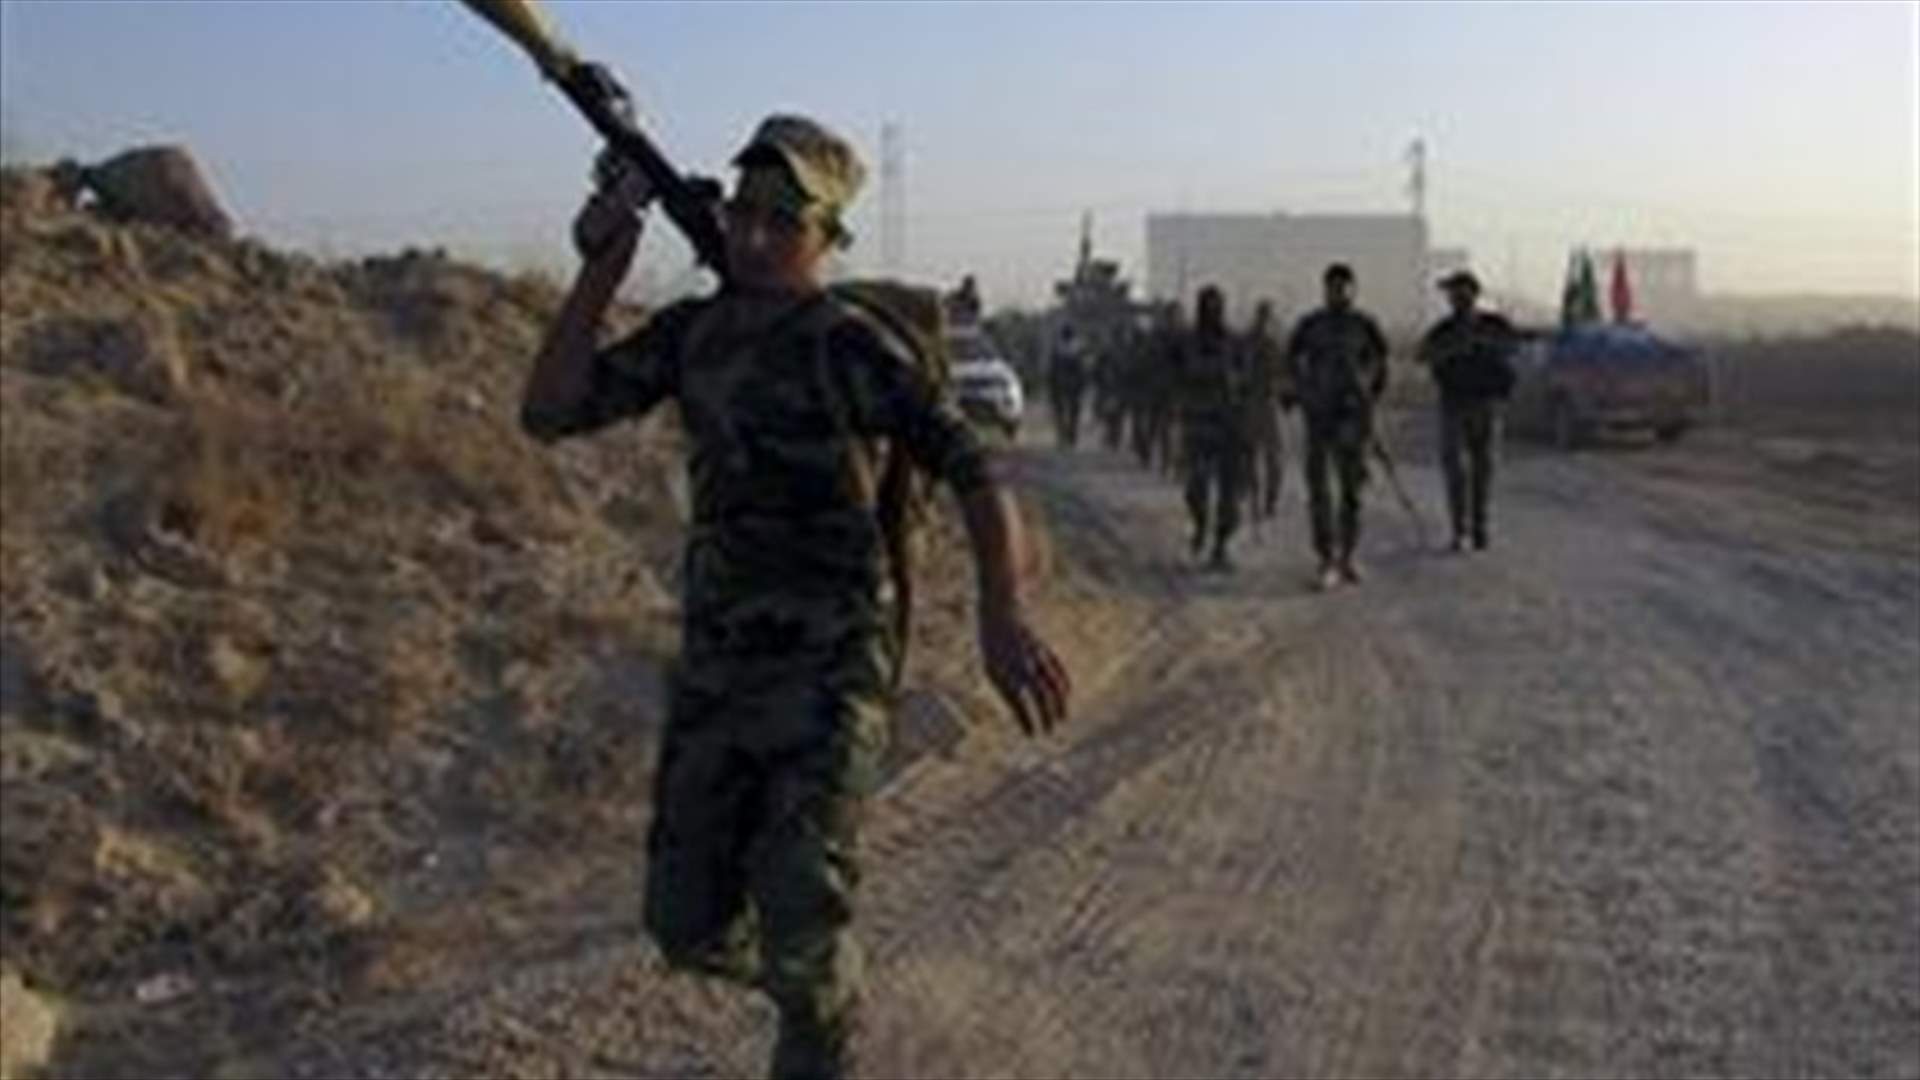 Iraq forces shell Falluja for second day; UN concerned for civilians